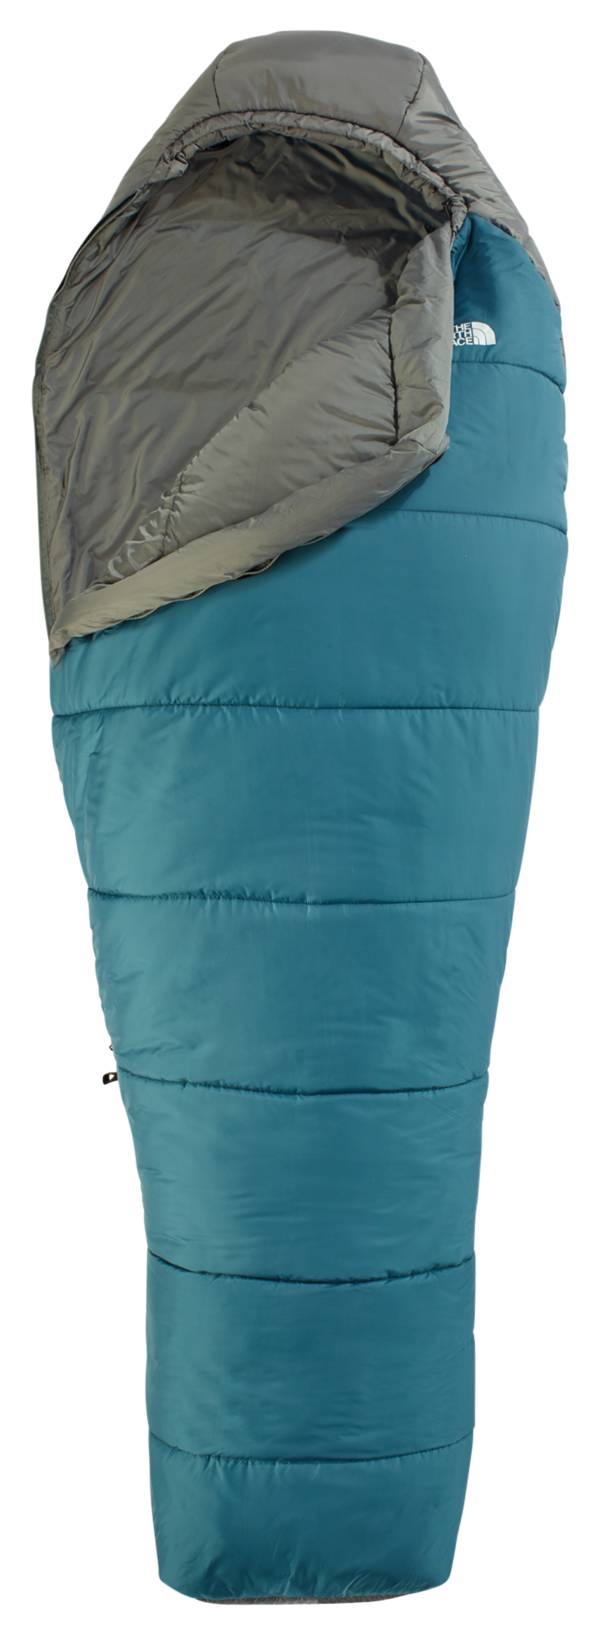 The North Face Wasatch 20° Sleeping Bag product image